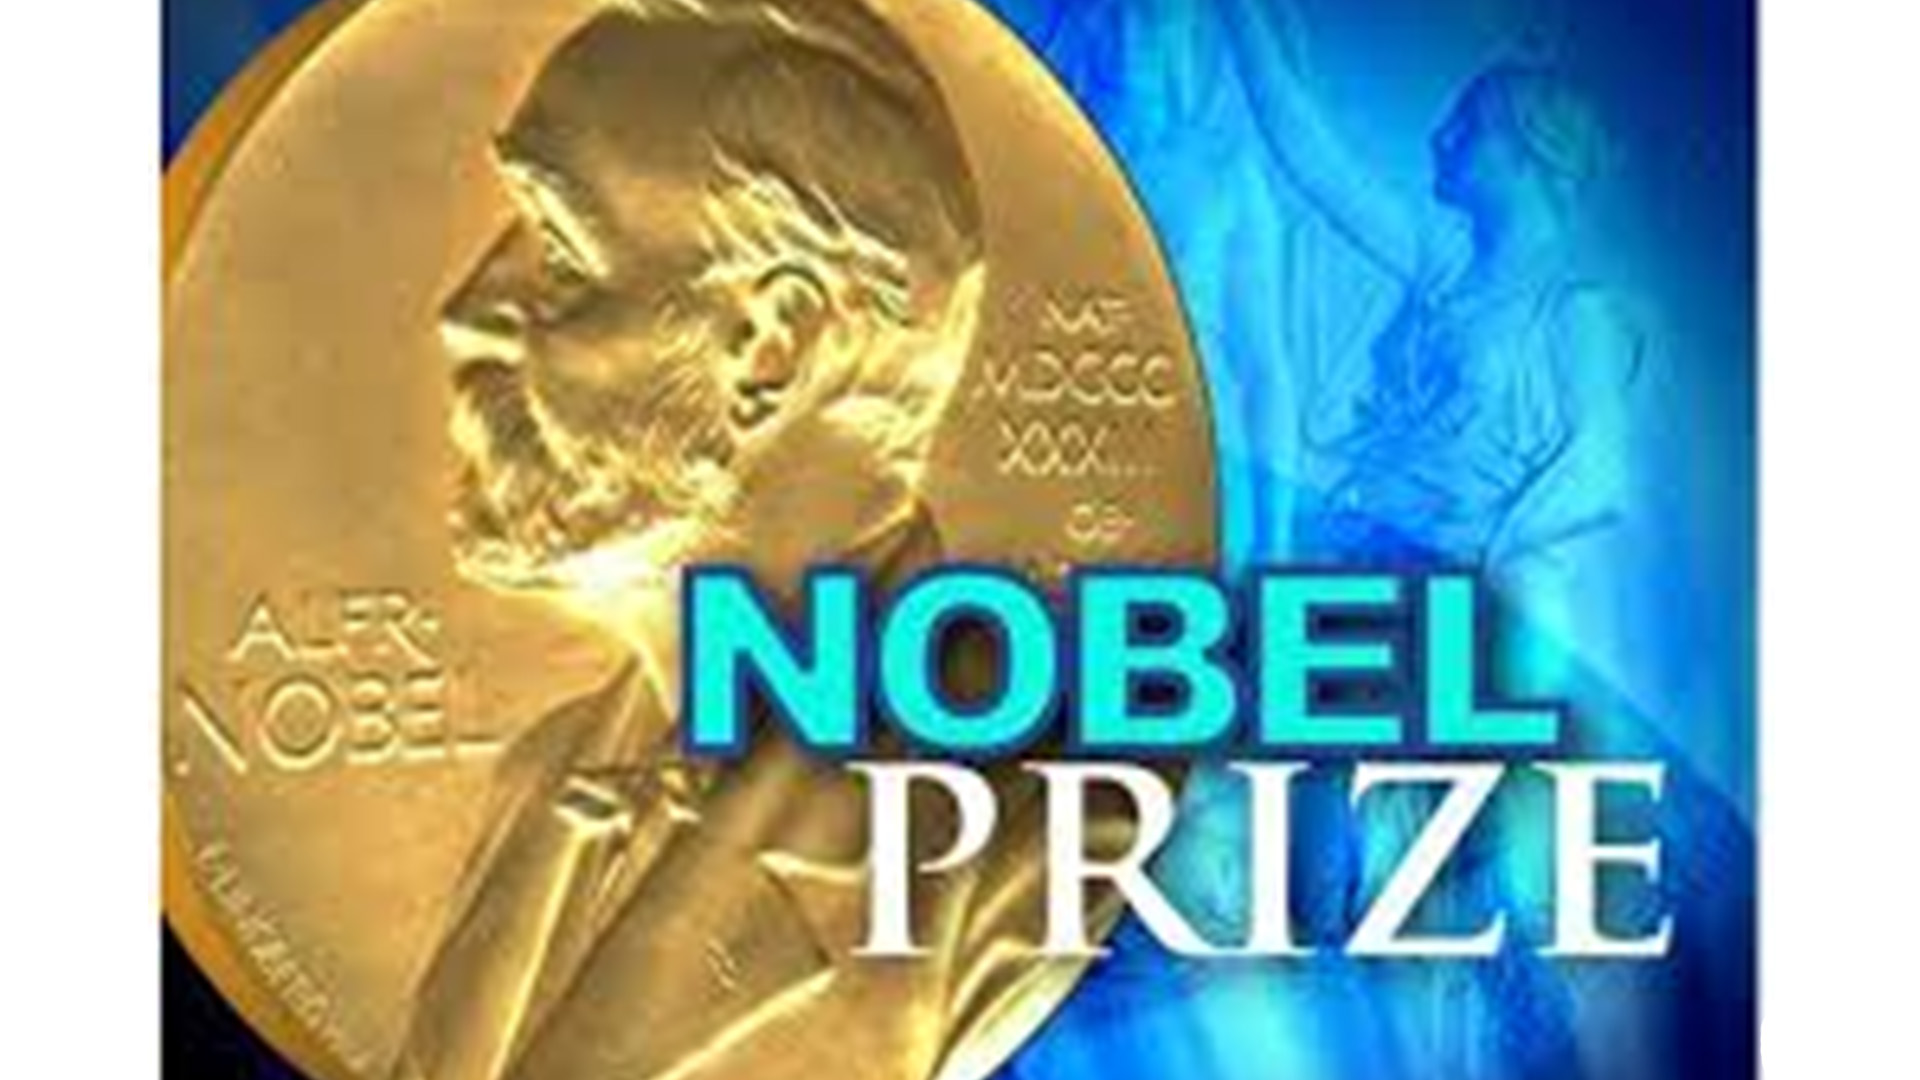 Nobel Prize Distribution ceremony to be replaced with televised event